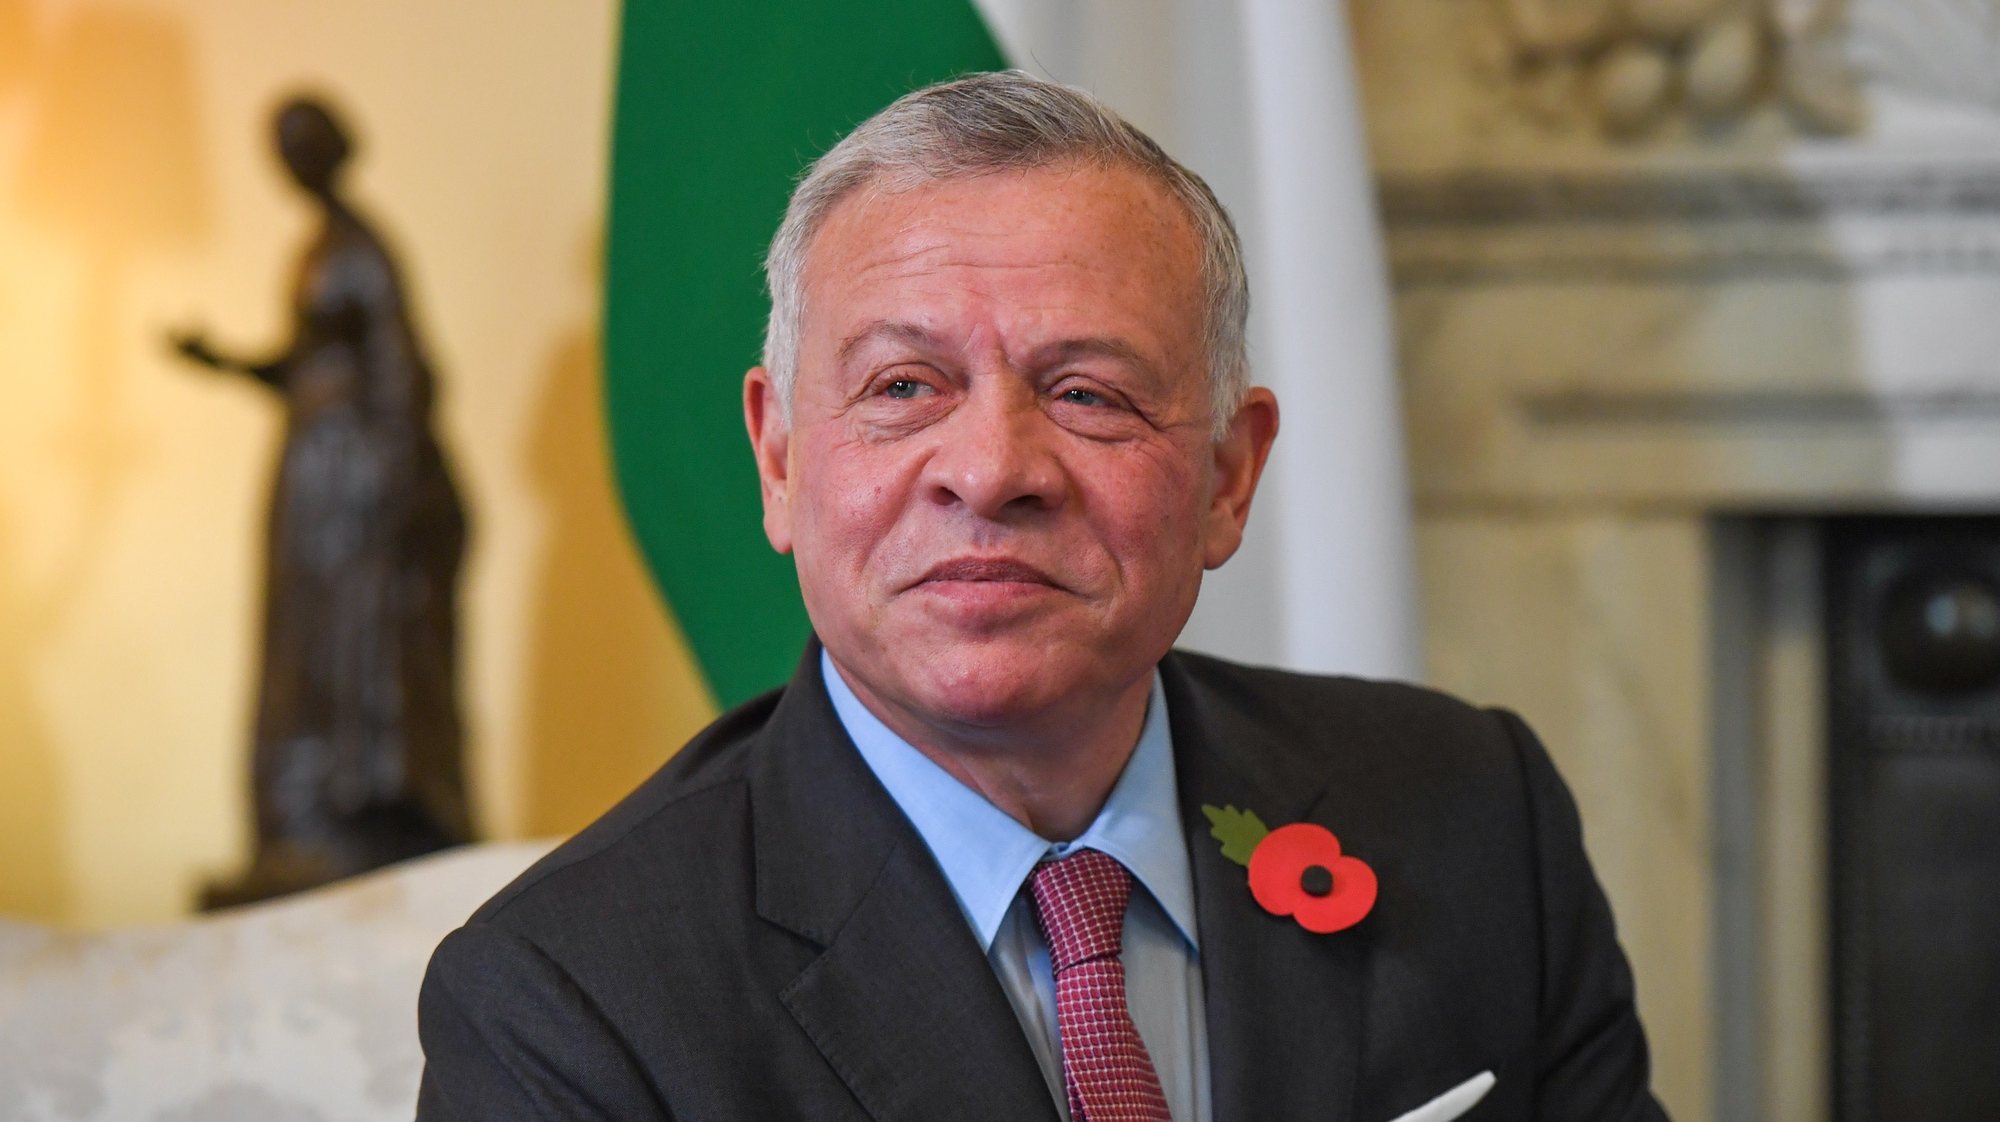 epa10299408 King Abdullah II of Jordan, attends a meeting with Rishi Sunak, British prime minister, at 10 Downing Street in London, Britain, 11 November 2022. King Abdullah II is on an official visit to Britain, he met with King Charles III on 10 November and British prime minister Rishi Sunak on 11 November.  EPA/Chris J. Ratcliffe / POOL